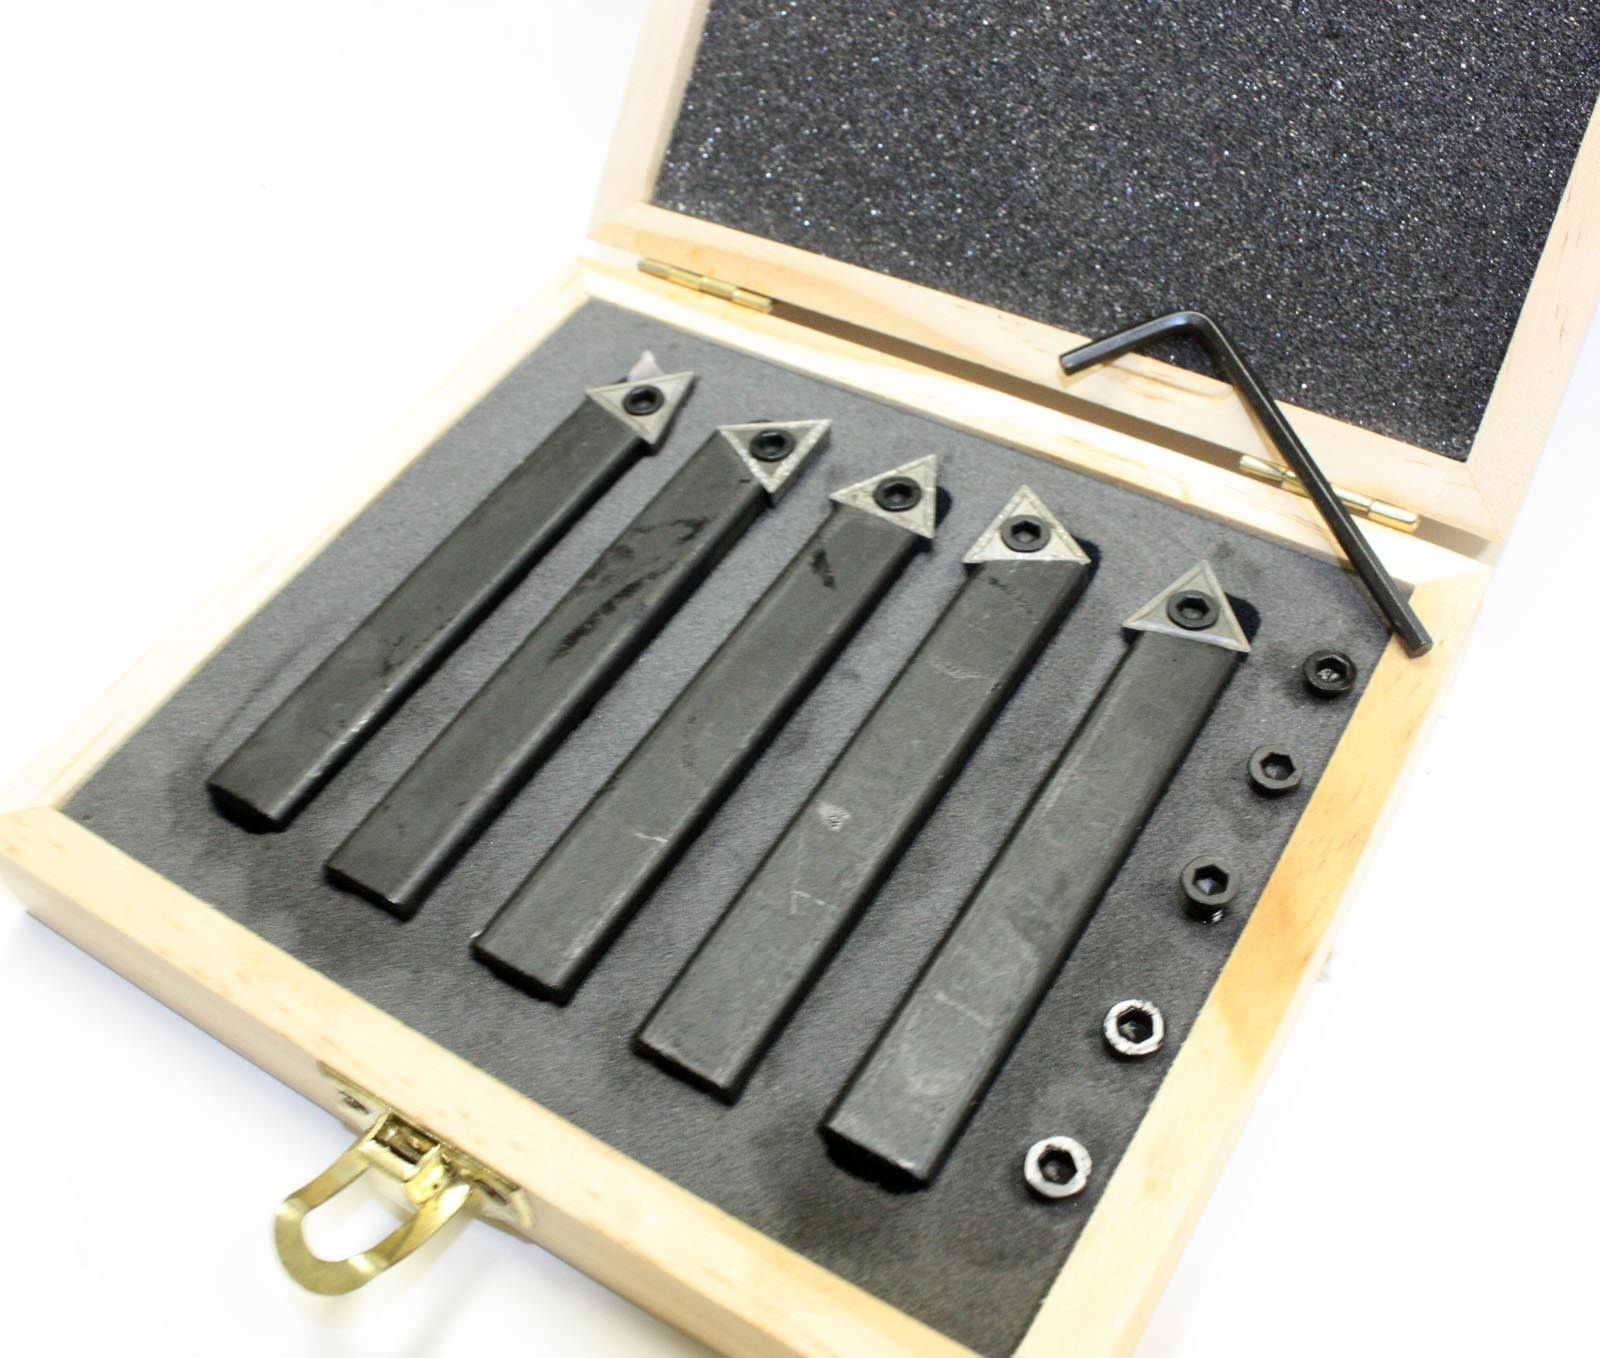 5/16" 5 PC Indexable Carbide Insert Turning Tool Bit Lathe Set C6 Chipbreaker for sale online 